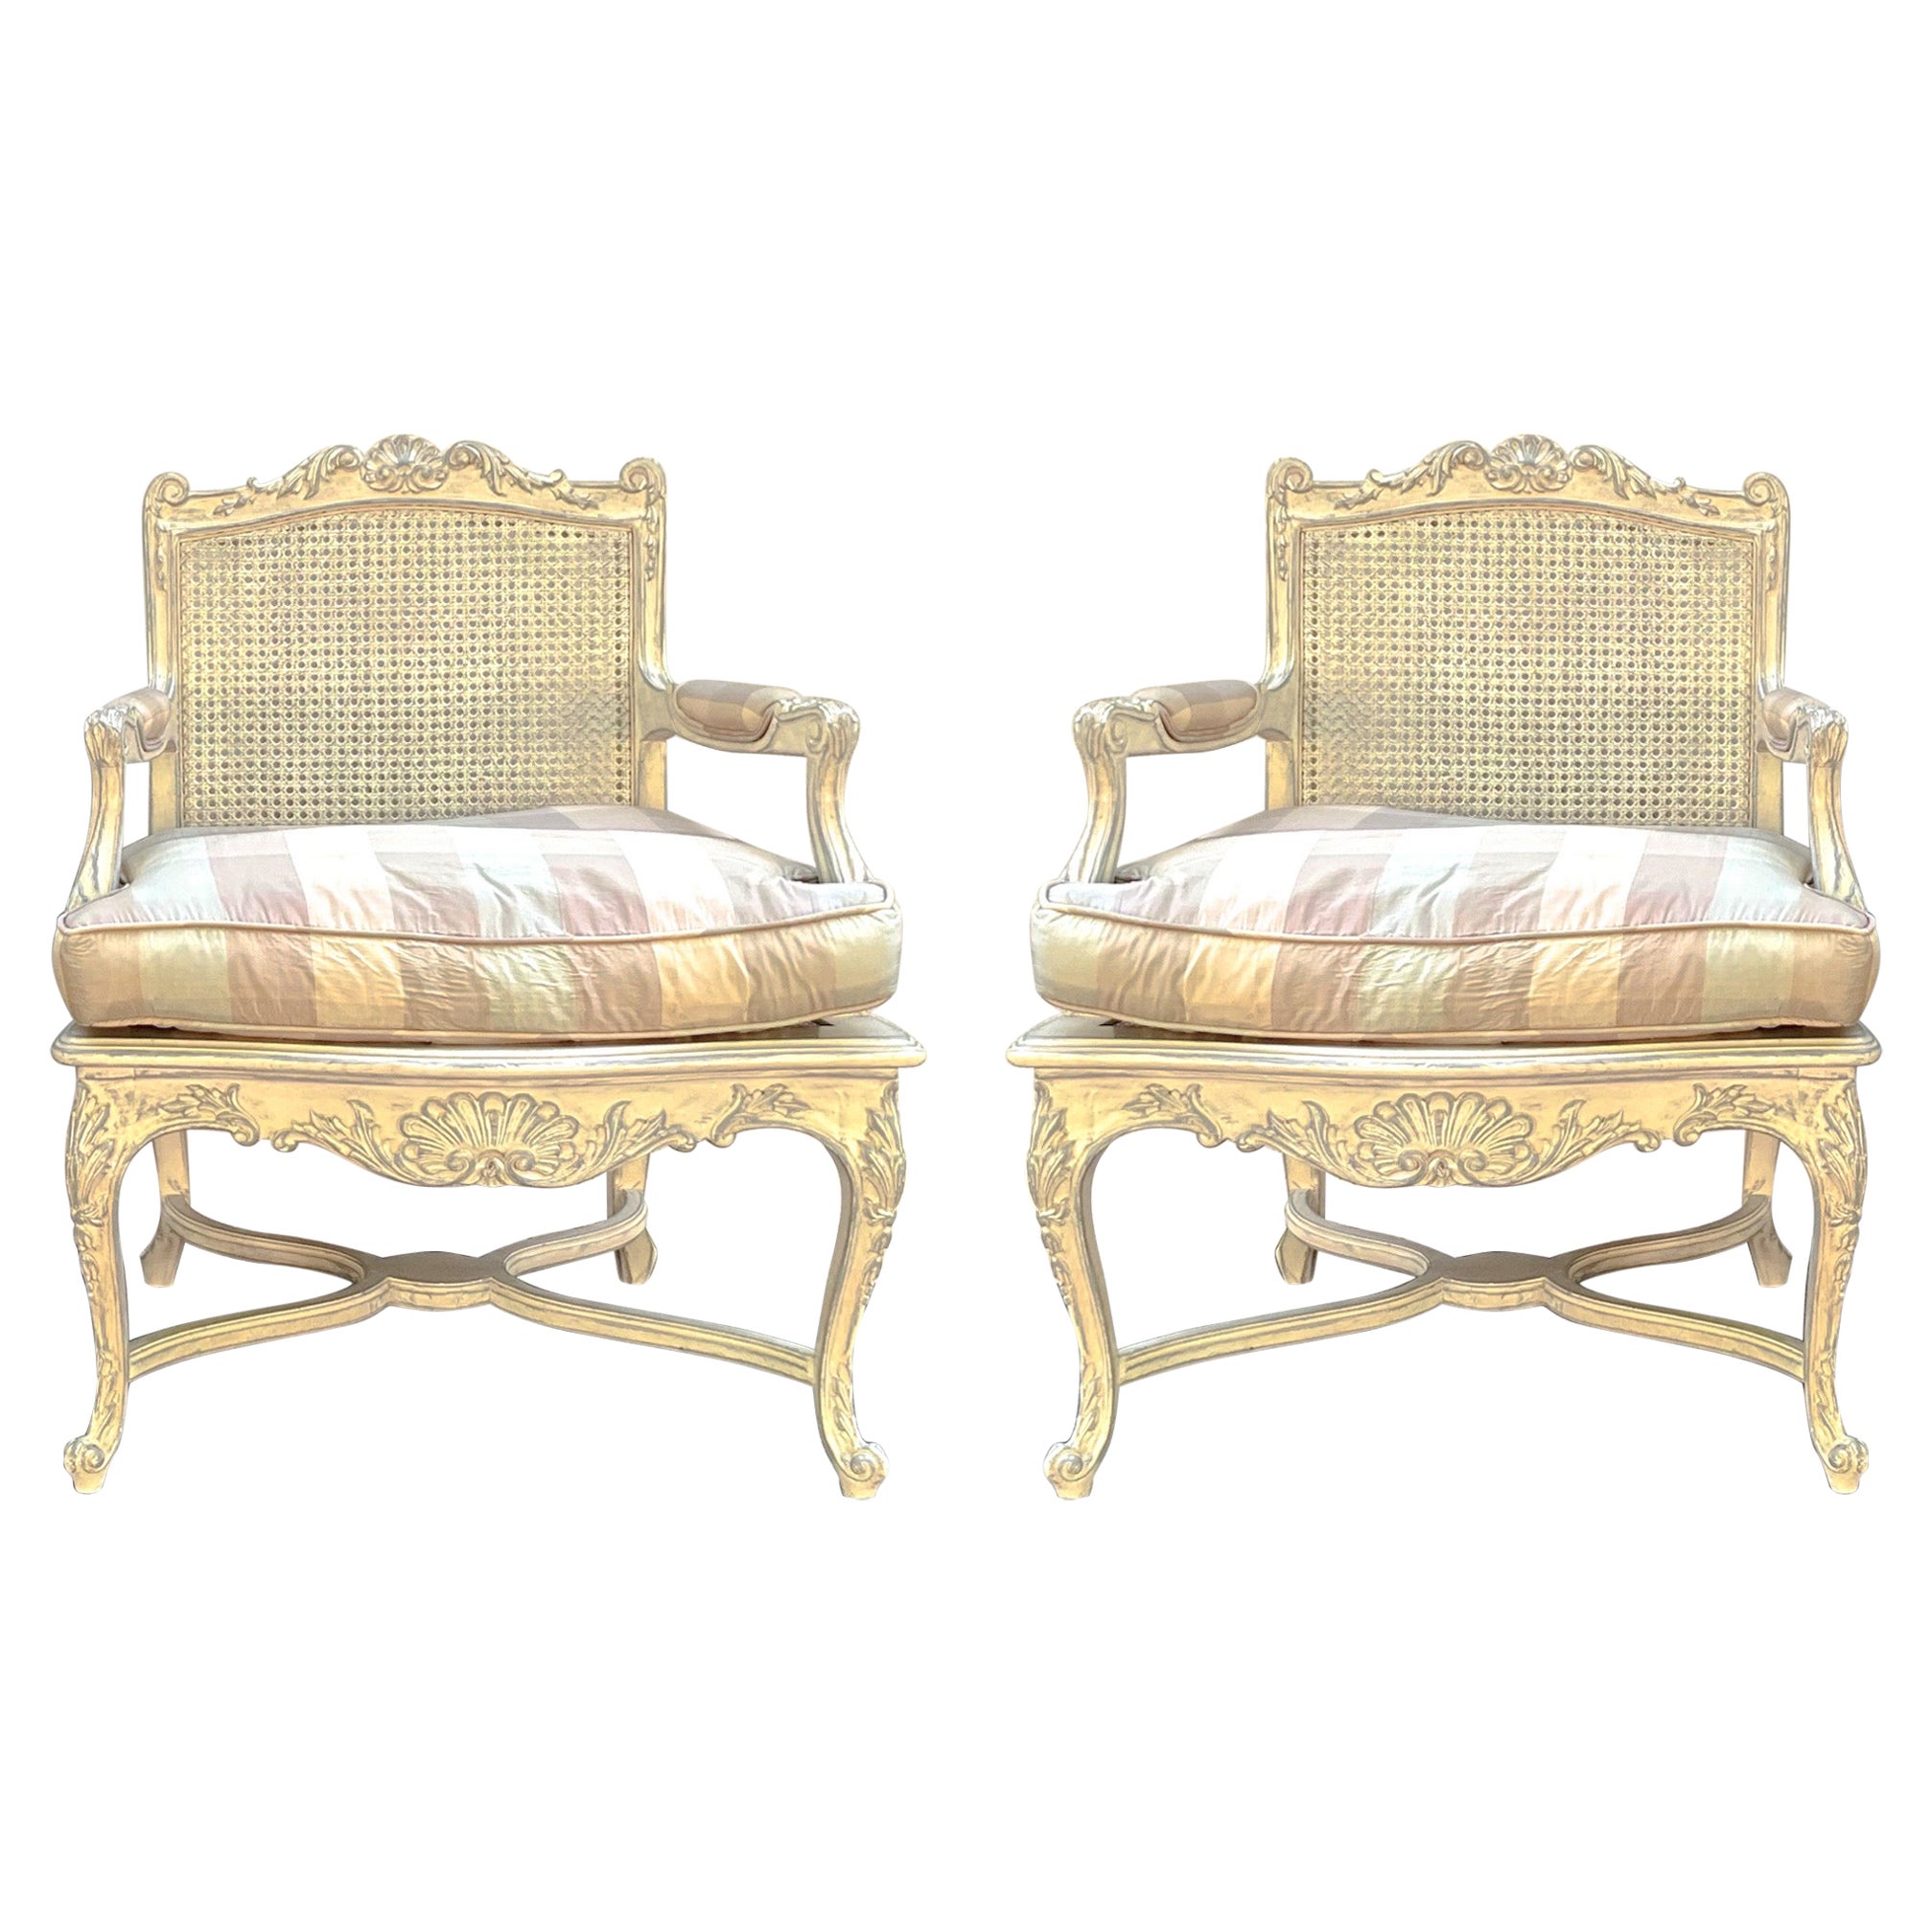 This is a lovely pair of French Louis XV style caned bergere chairs with vintage check upholstery. The upholstery feels like silk but could be a blend. The frames are ivory painted with gray accents. The seat without the cushion is 16”. The arm is